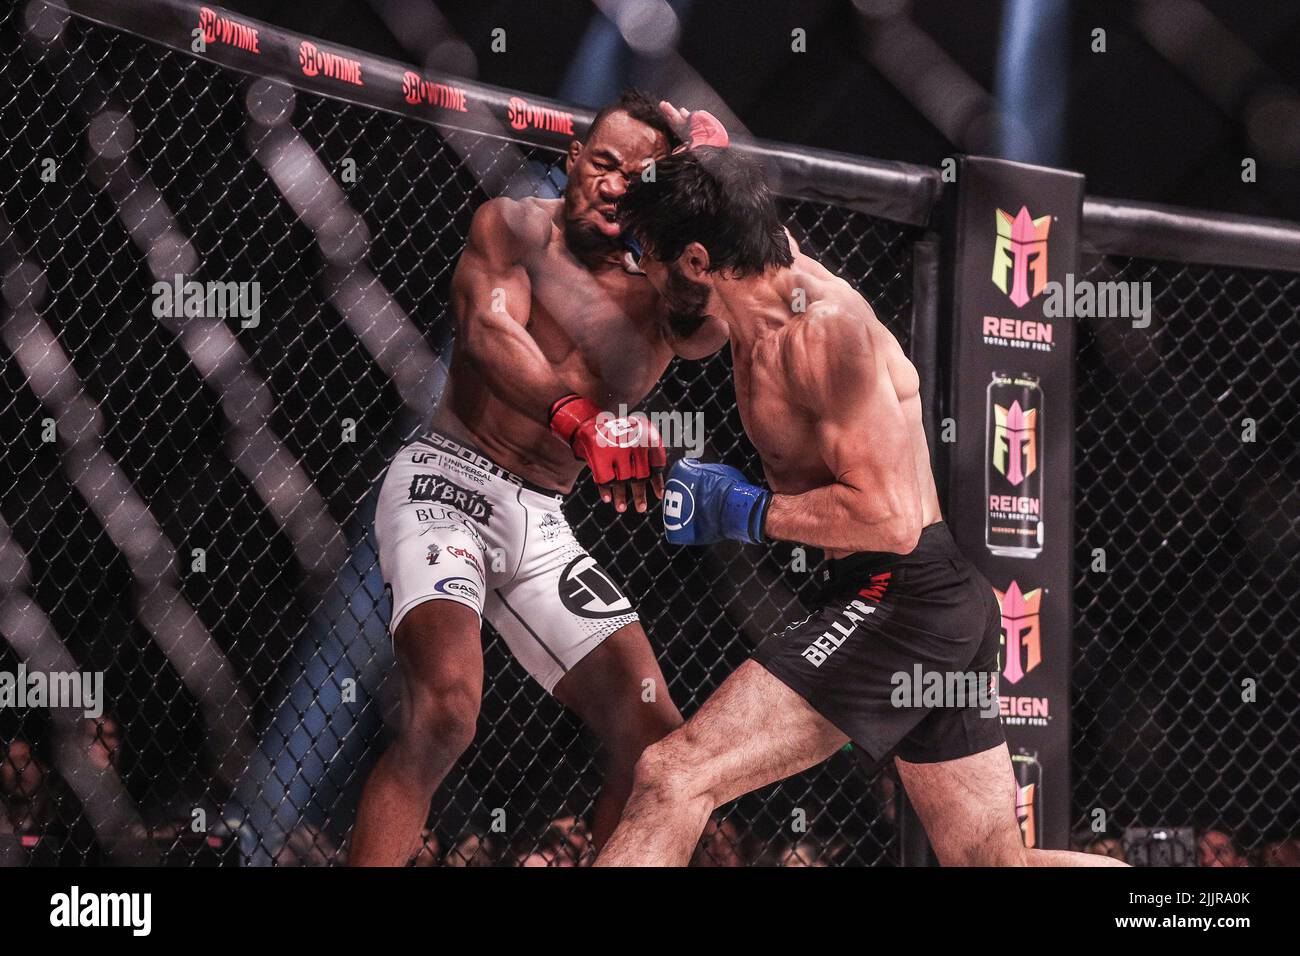 Tofiq Musayev lands a big overhand right to knock out Sidney Outlaw at Bellator 283. Tofiq Musayev wins by way of Knock Out in the first round from th Stock Photo